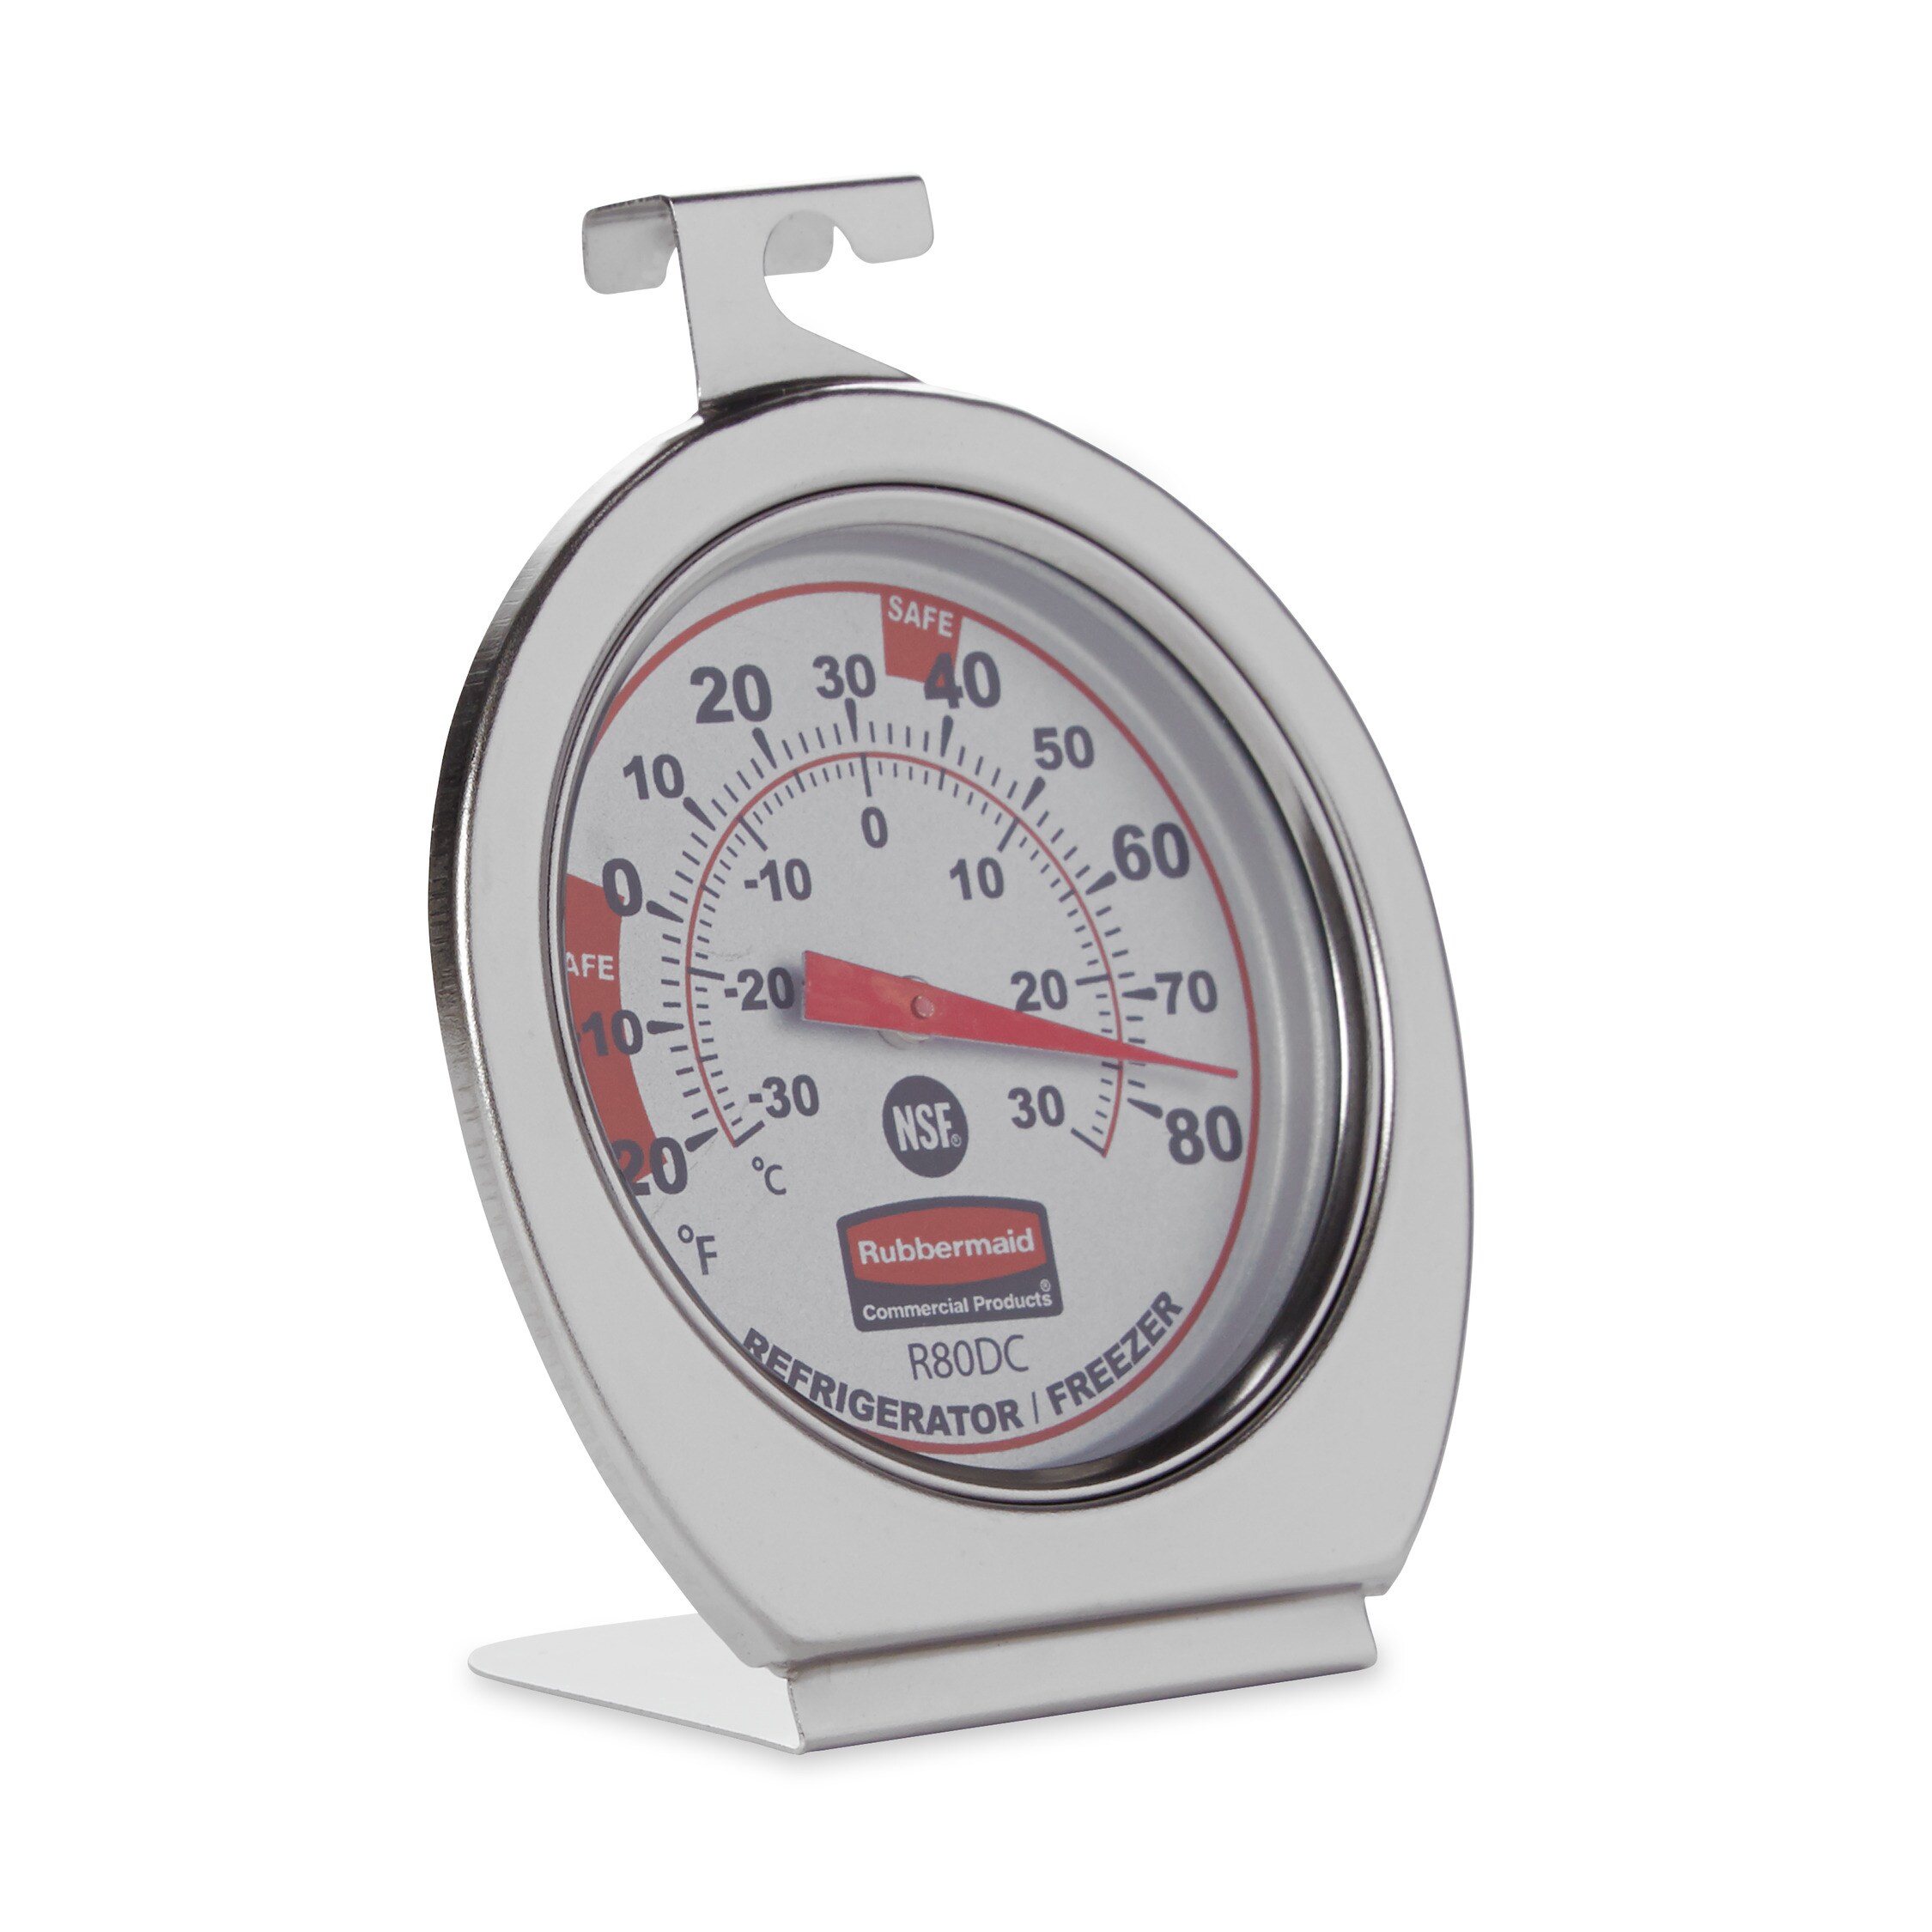 Refrigerator thermometer Appliance Parts & Accessories at